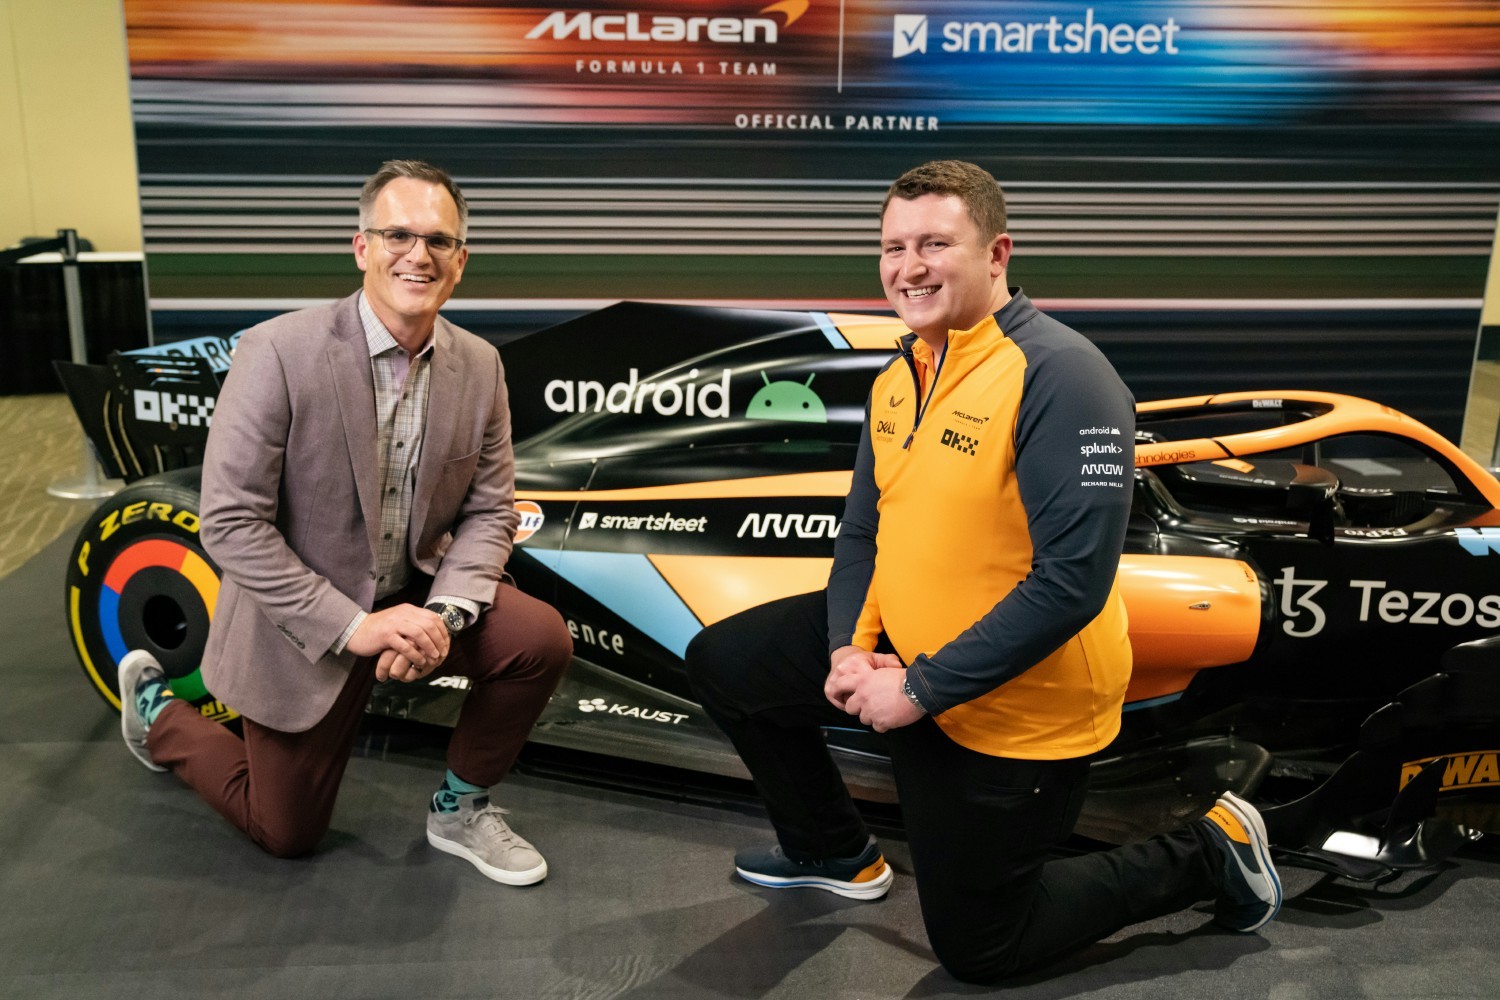 Smartsheet CEO Mark Mader with McLaren's Head of Commercial Technology Ed Green.